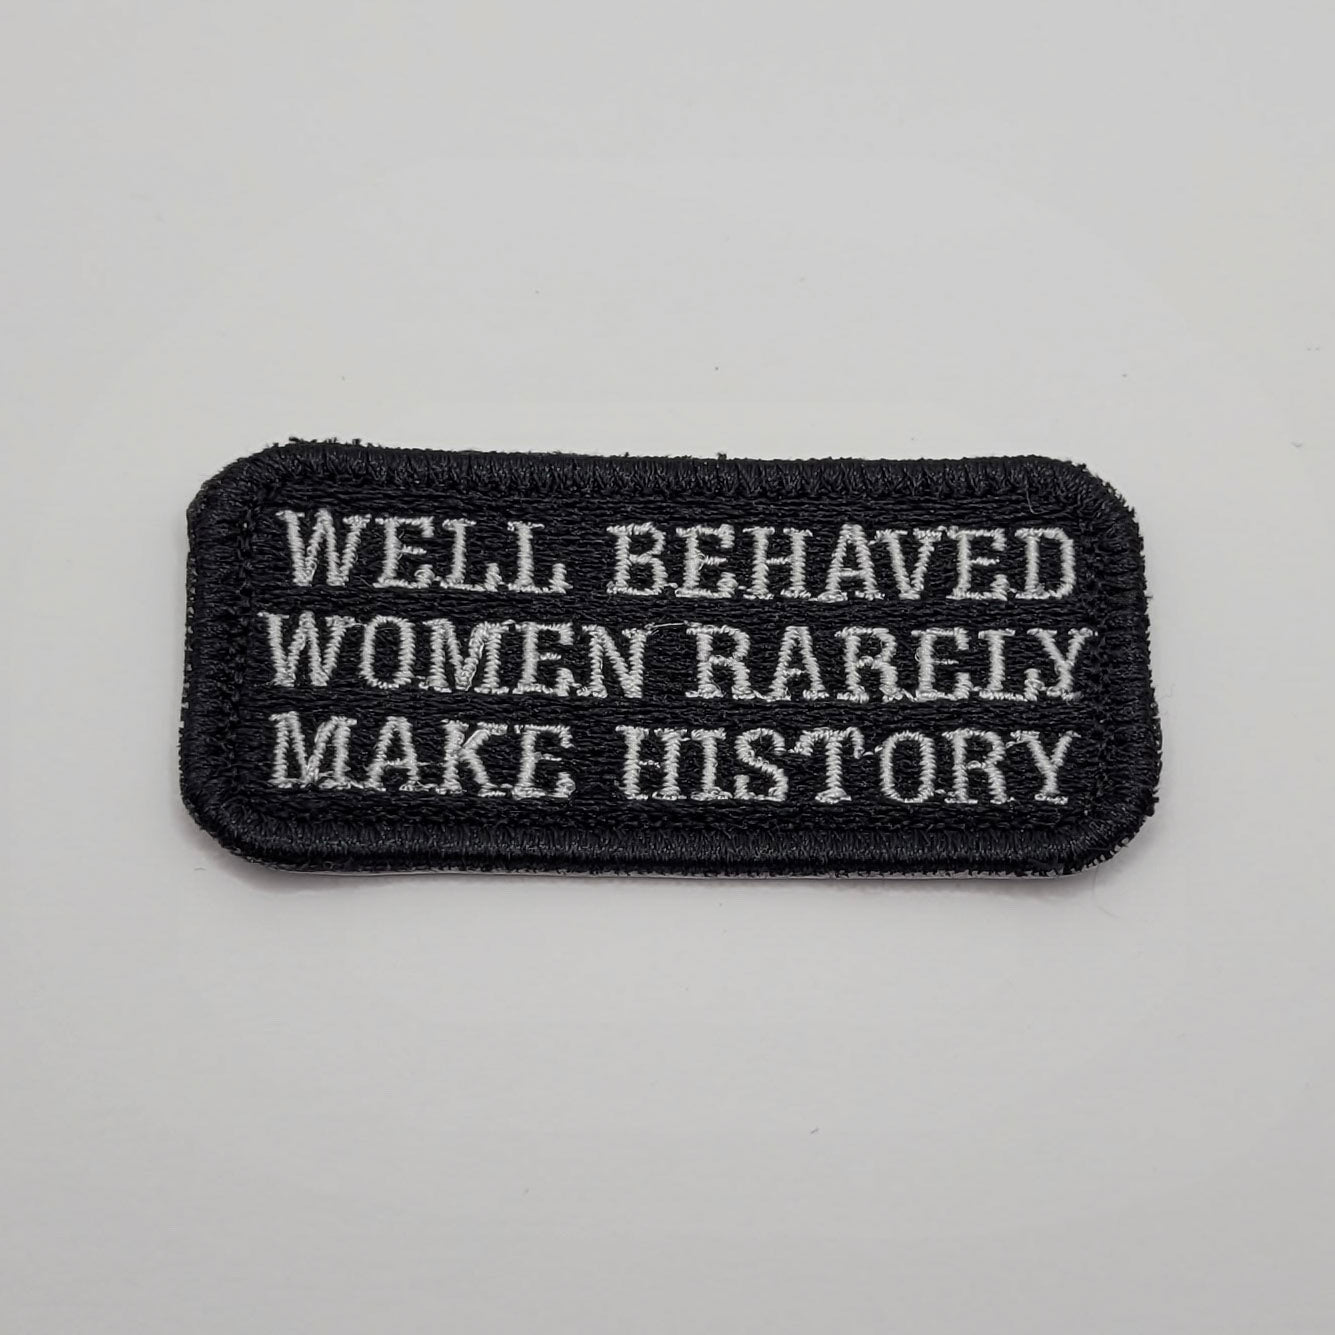 Well Behaved Women Rarely Make History Embroidered Patch